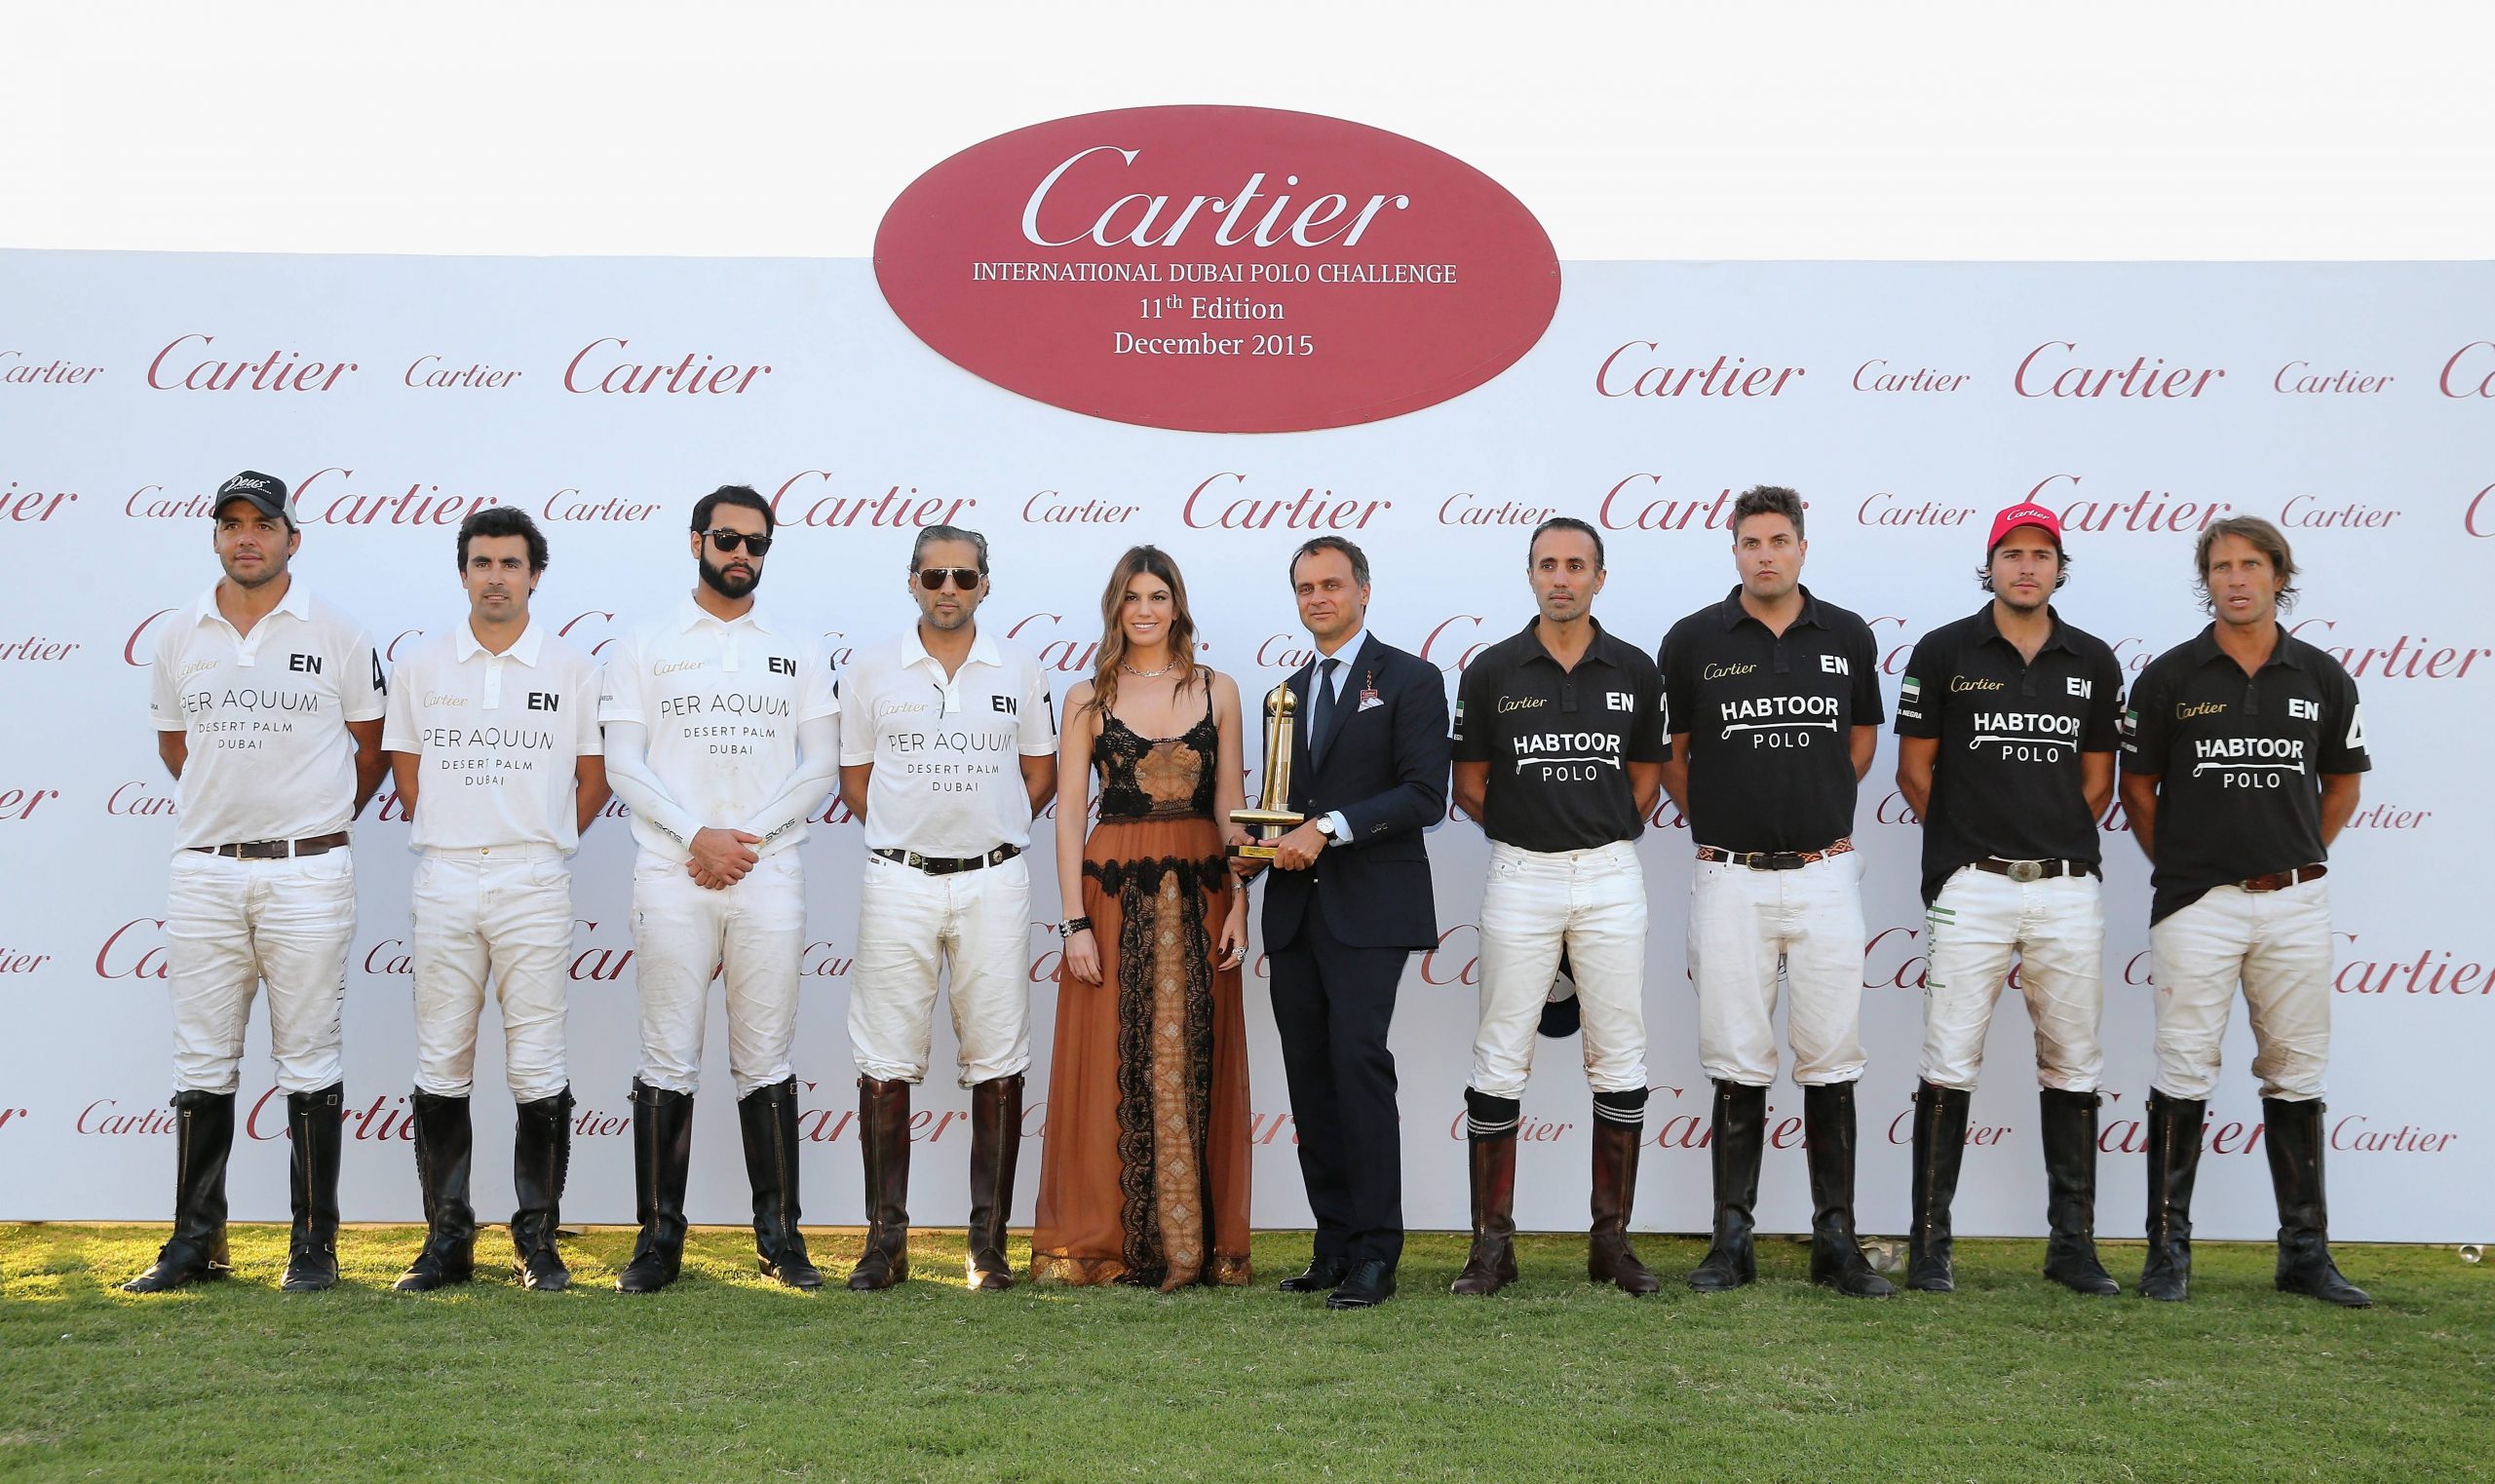 Bianca Brandolini and Regional Managing Director of Cartier Middle East, India and Africa Laurent Gabori pose with the Habtoor Polo and Desert Palm polo teams.